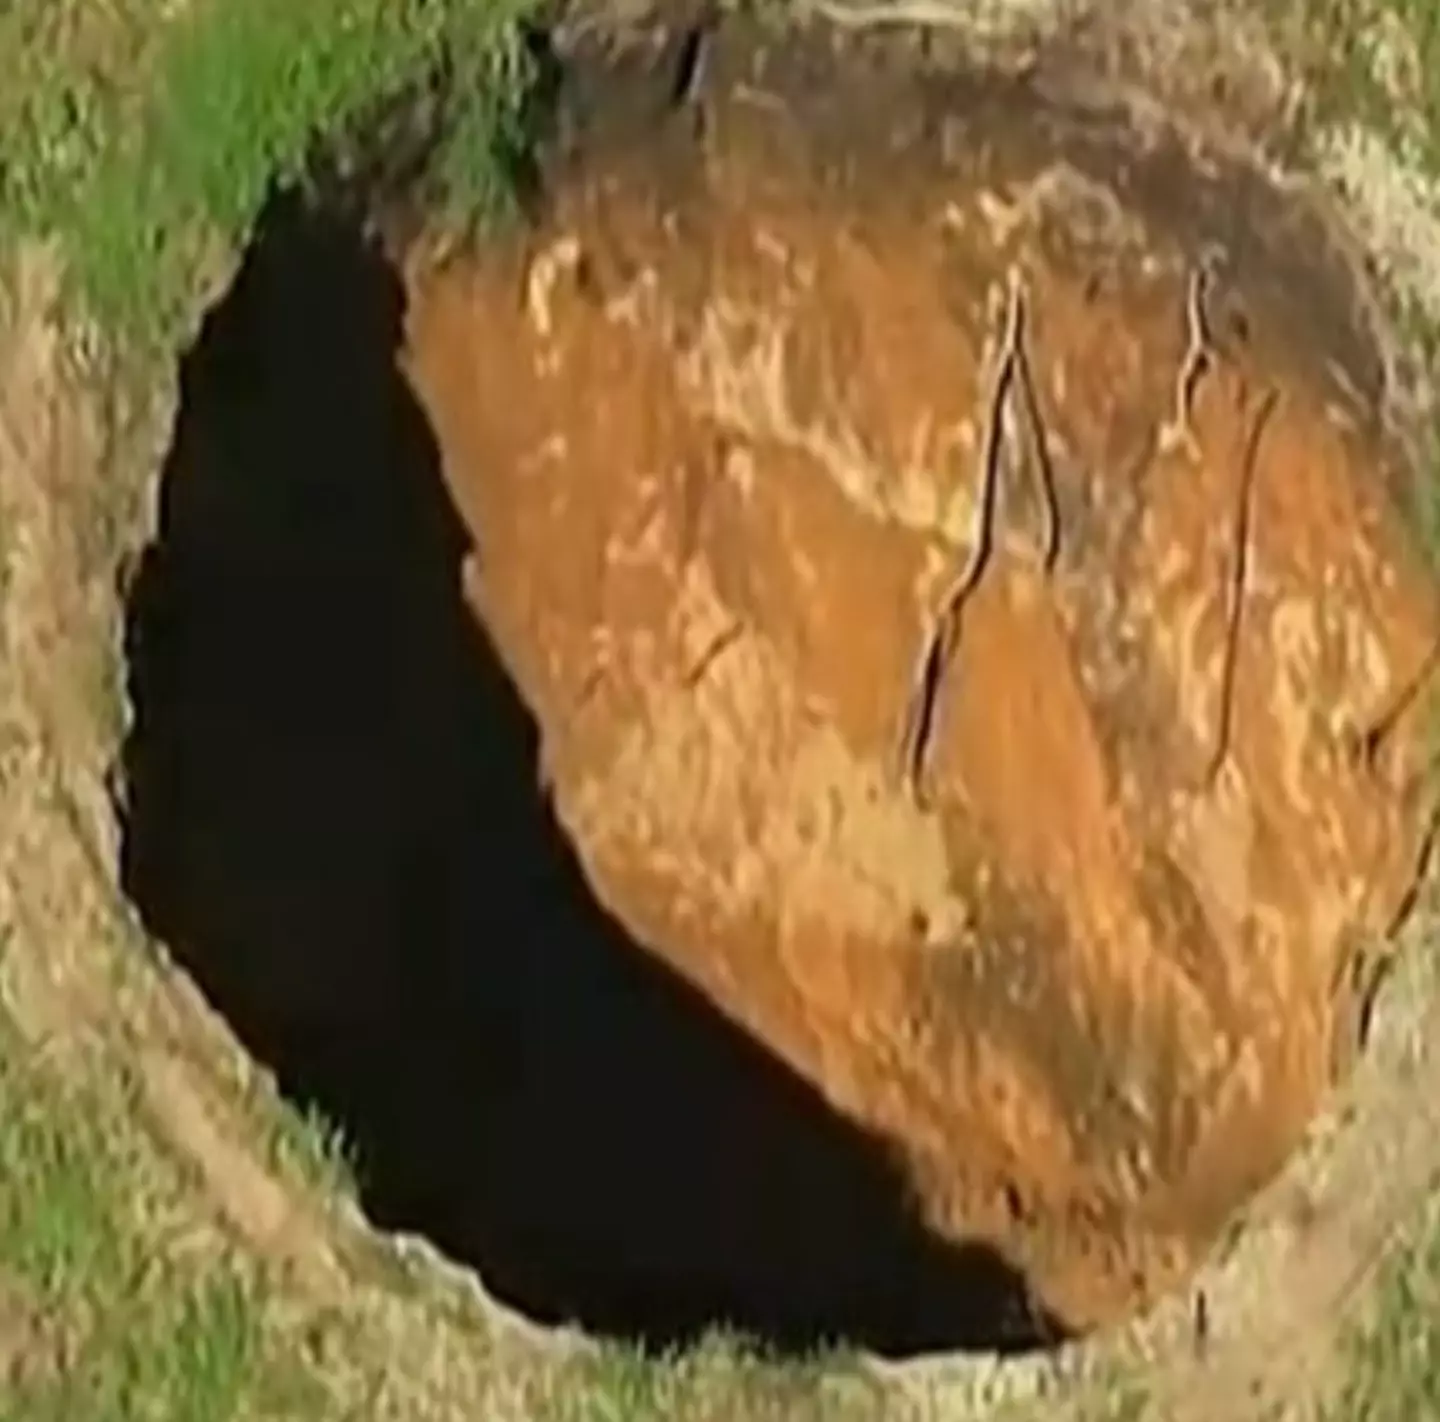 The sinkhole opened up beneath Jeffrey Bush's room in March 2013.